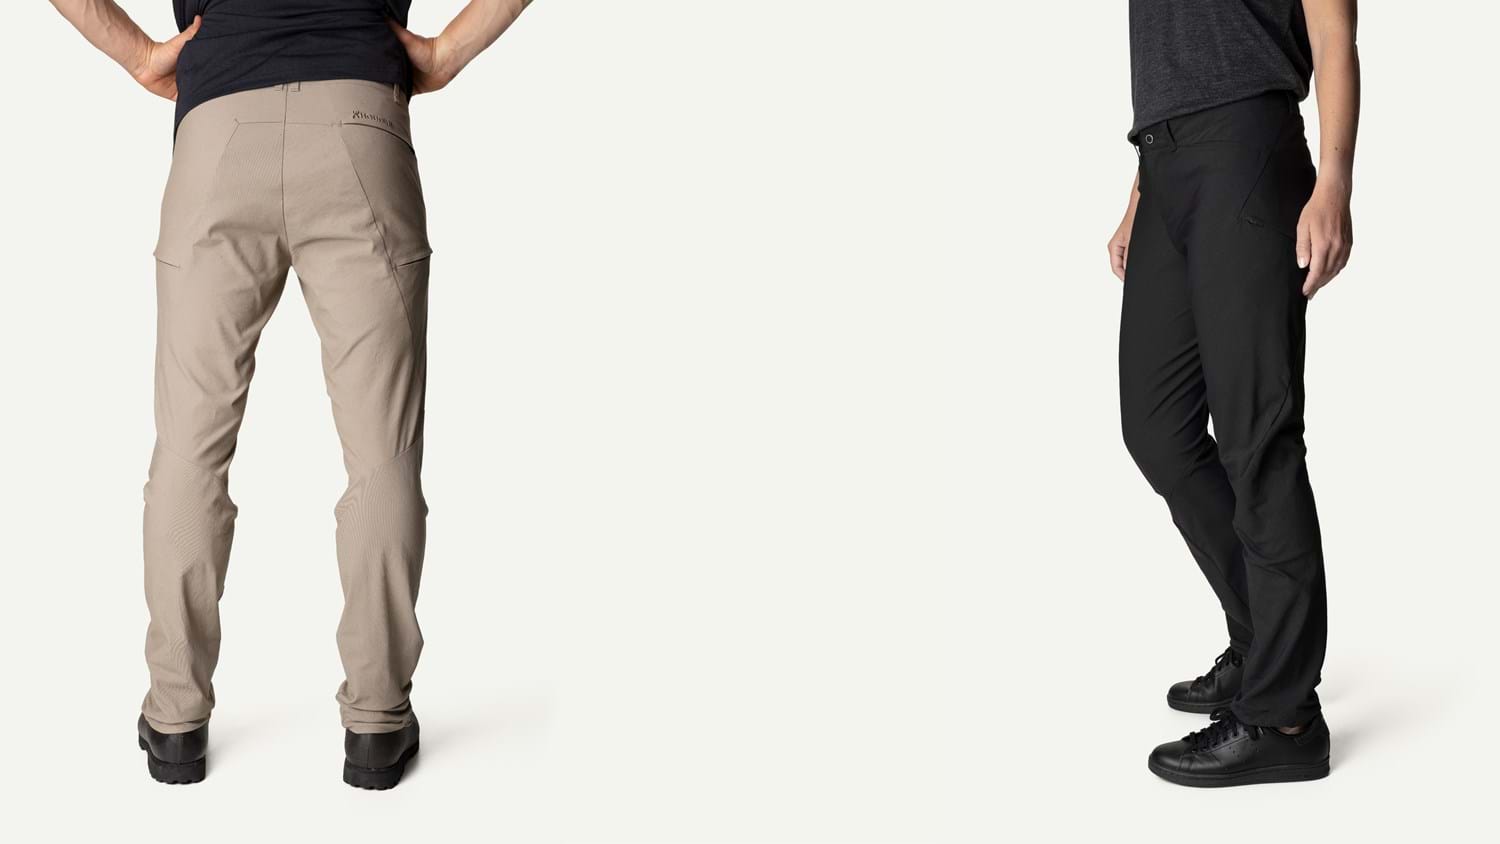 Houdini Skiffer Pants: The classic outdoor pants